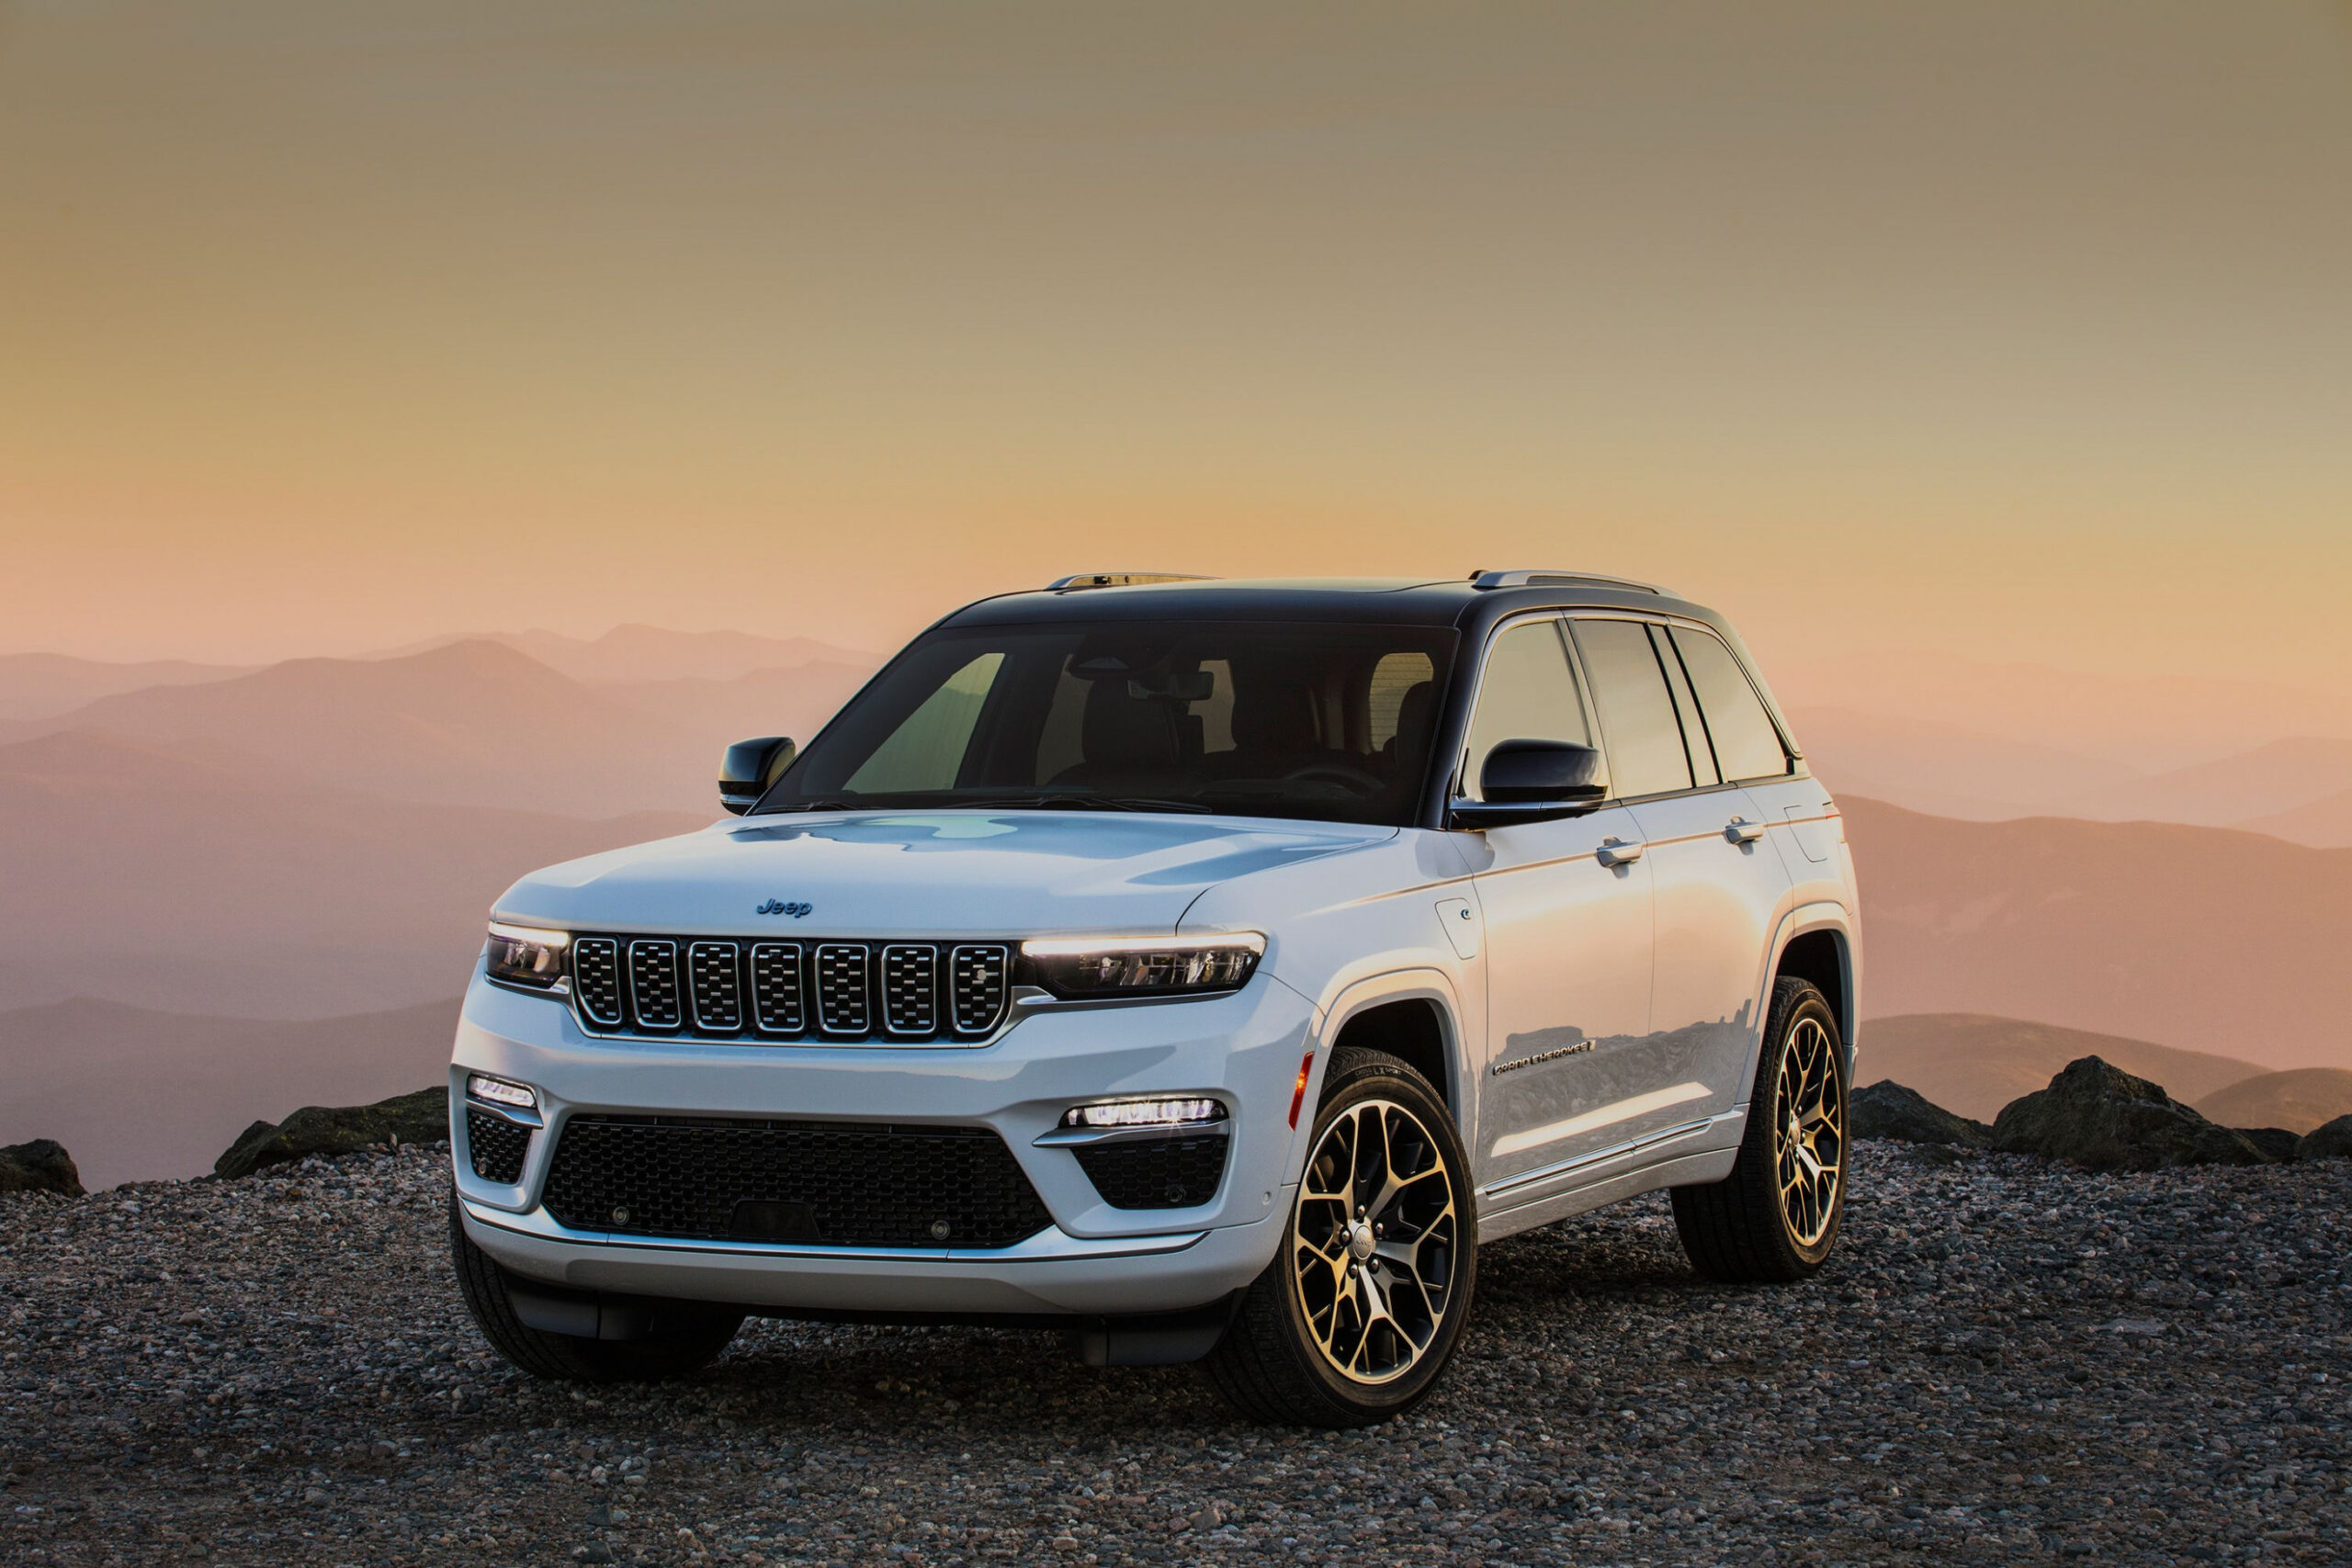 5 Jeep Grand Cherokee Review, Pricing, And Specs When Will 2022 Jeep Grand Cherokee Be Available